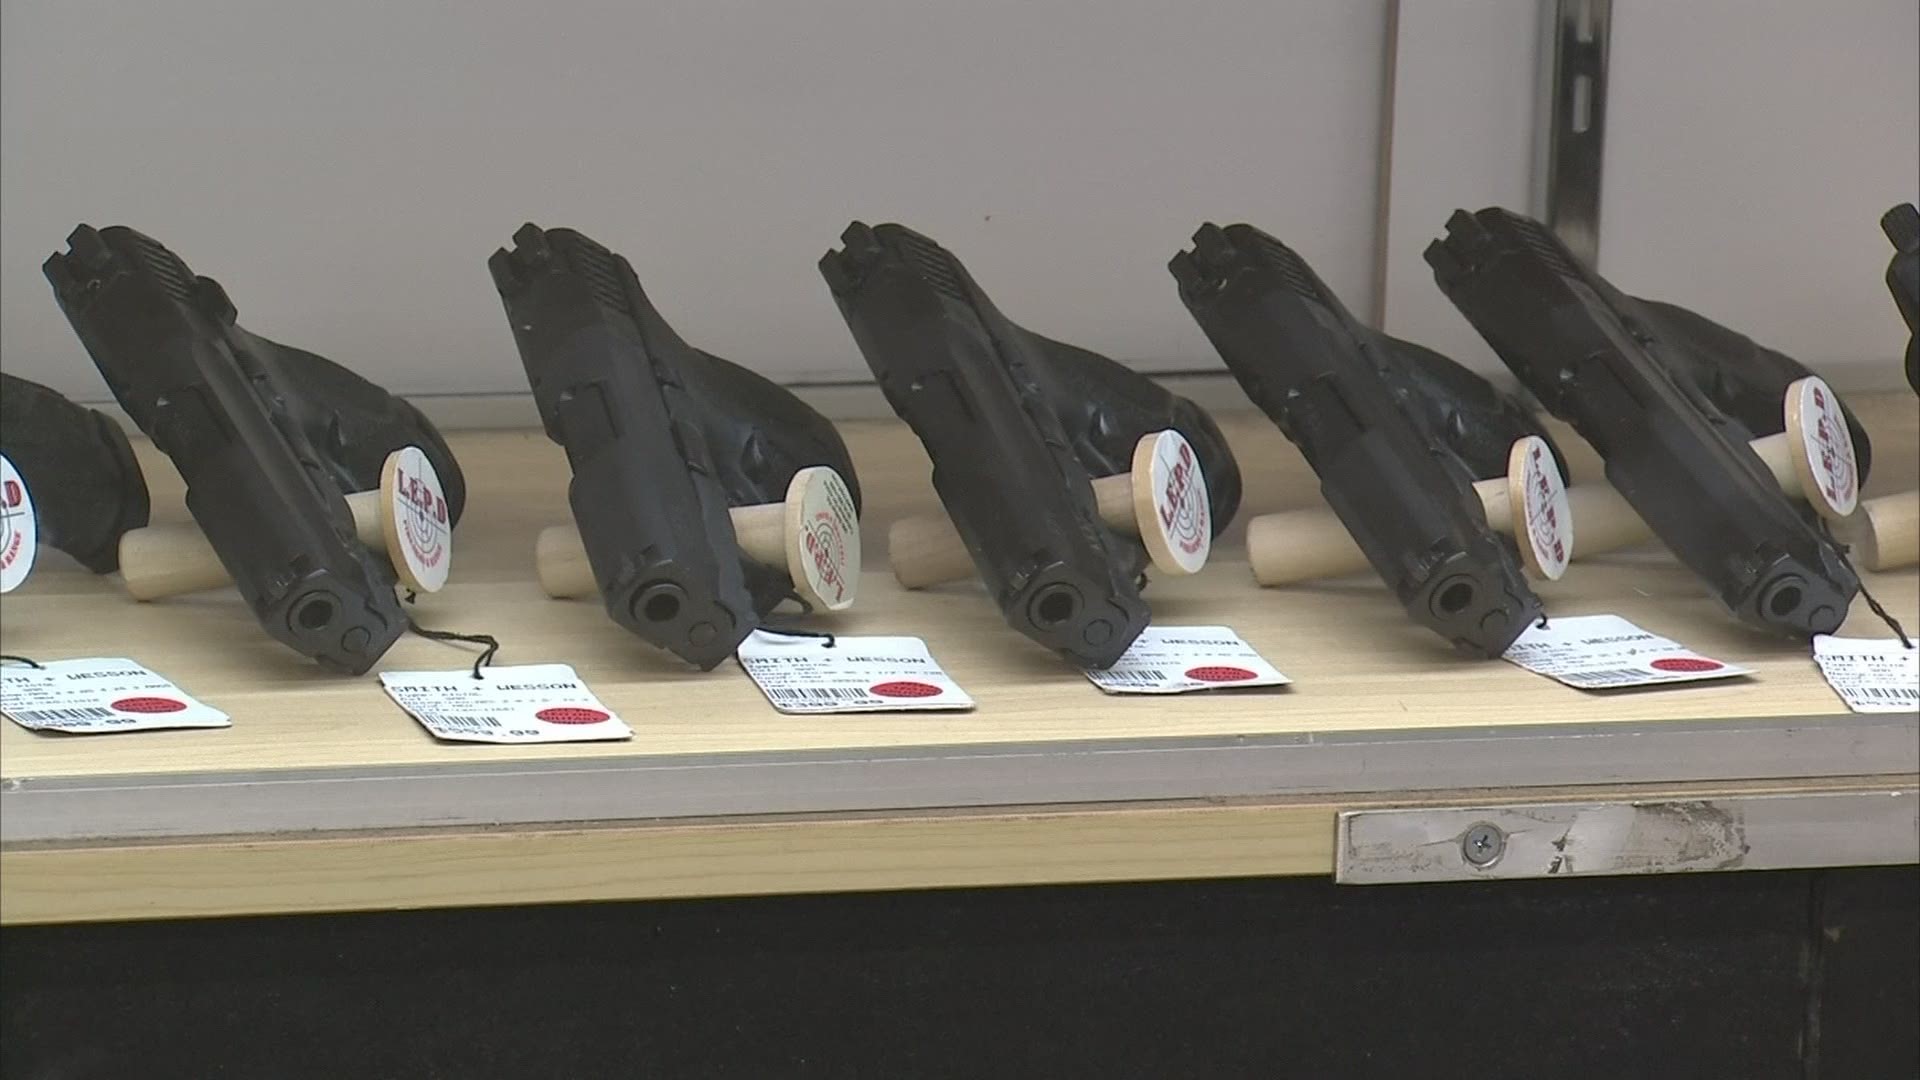 The owners of L.E.P.D. in Columbus say they've had days in the last few months where they sell 150 guns in one day.